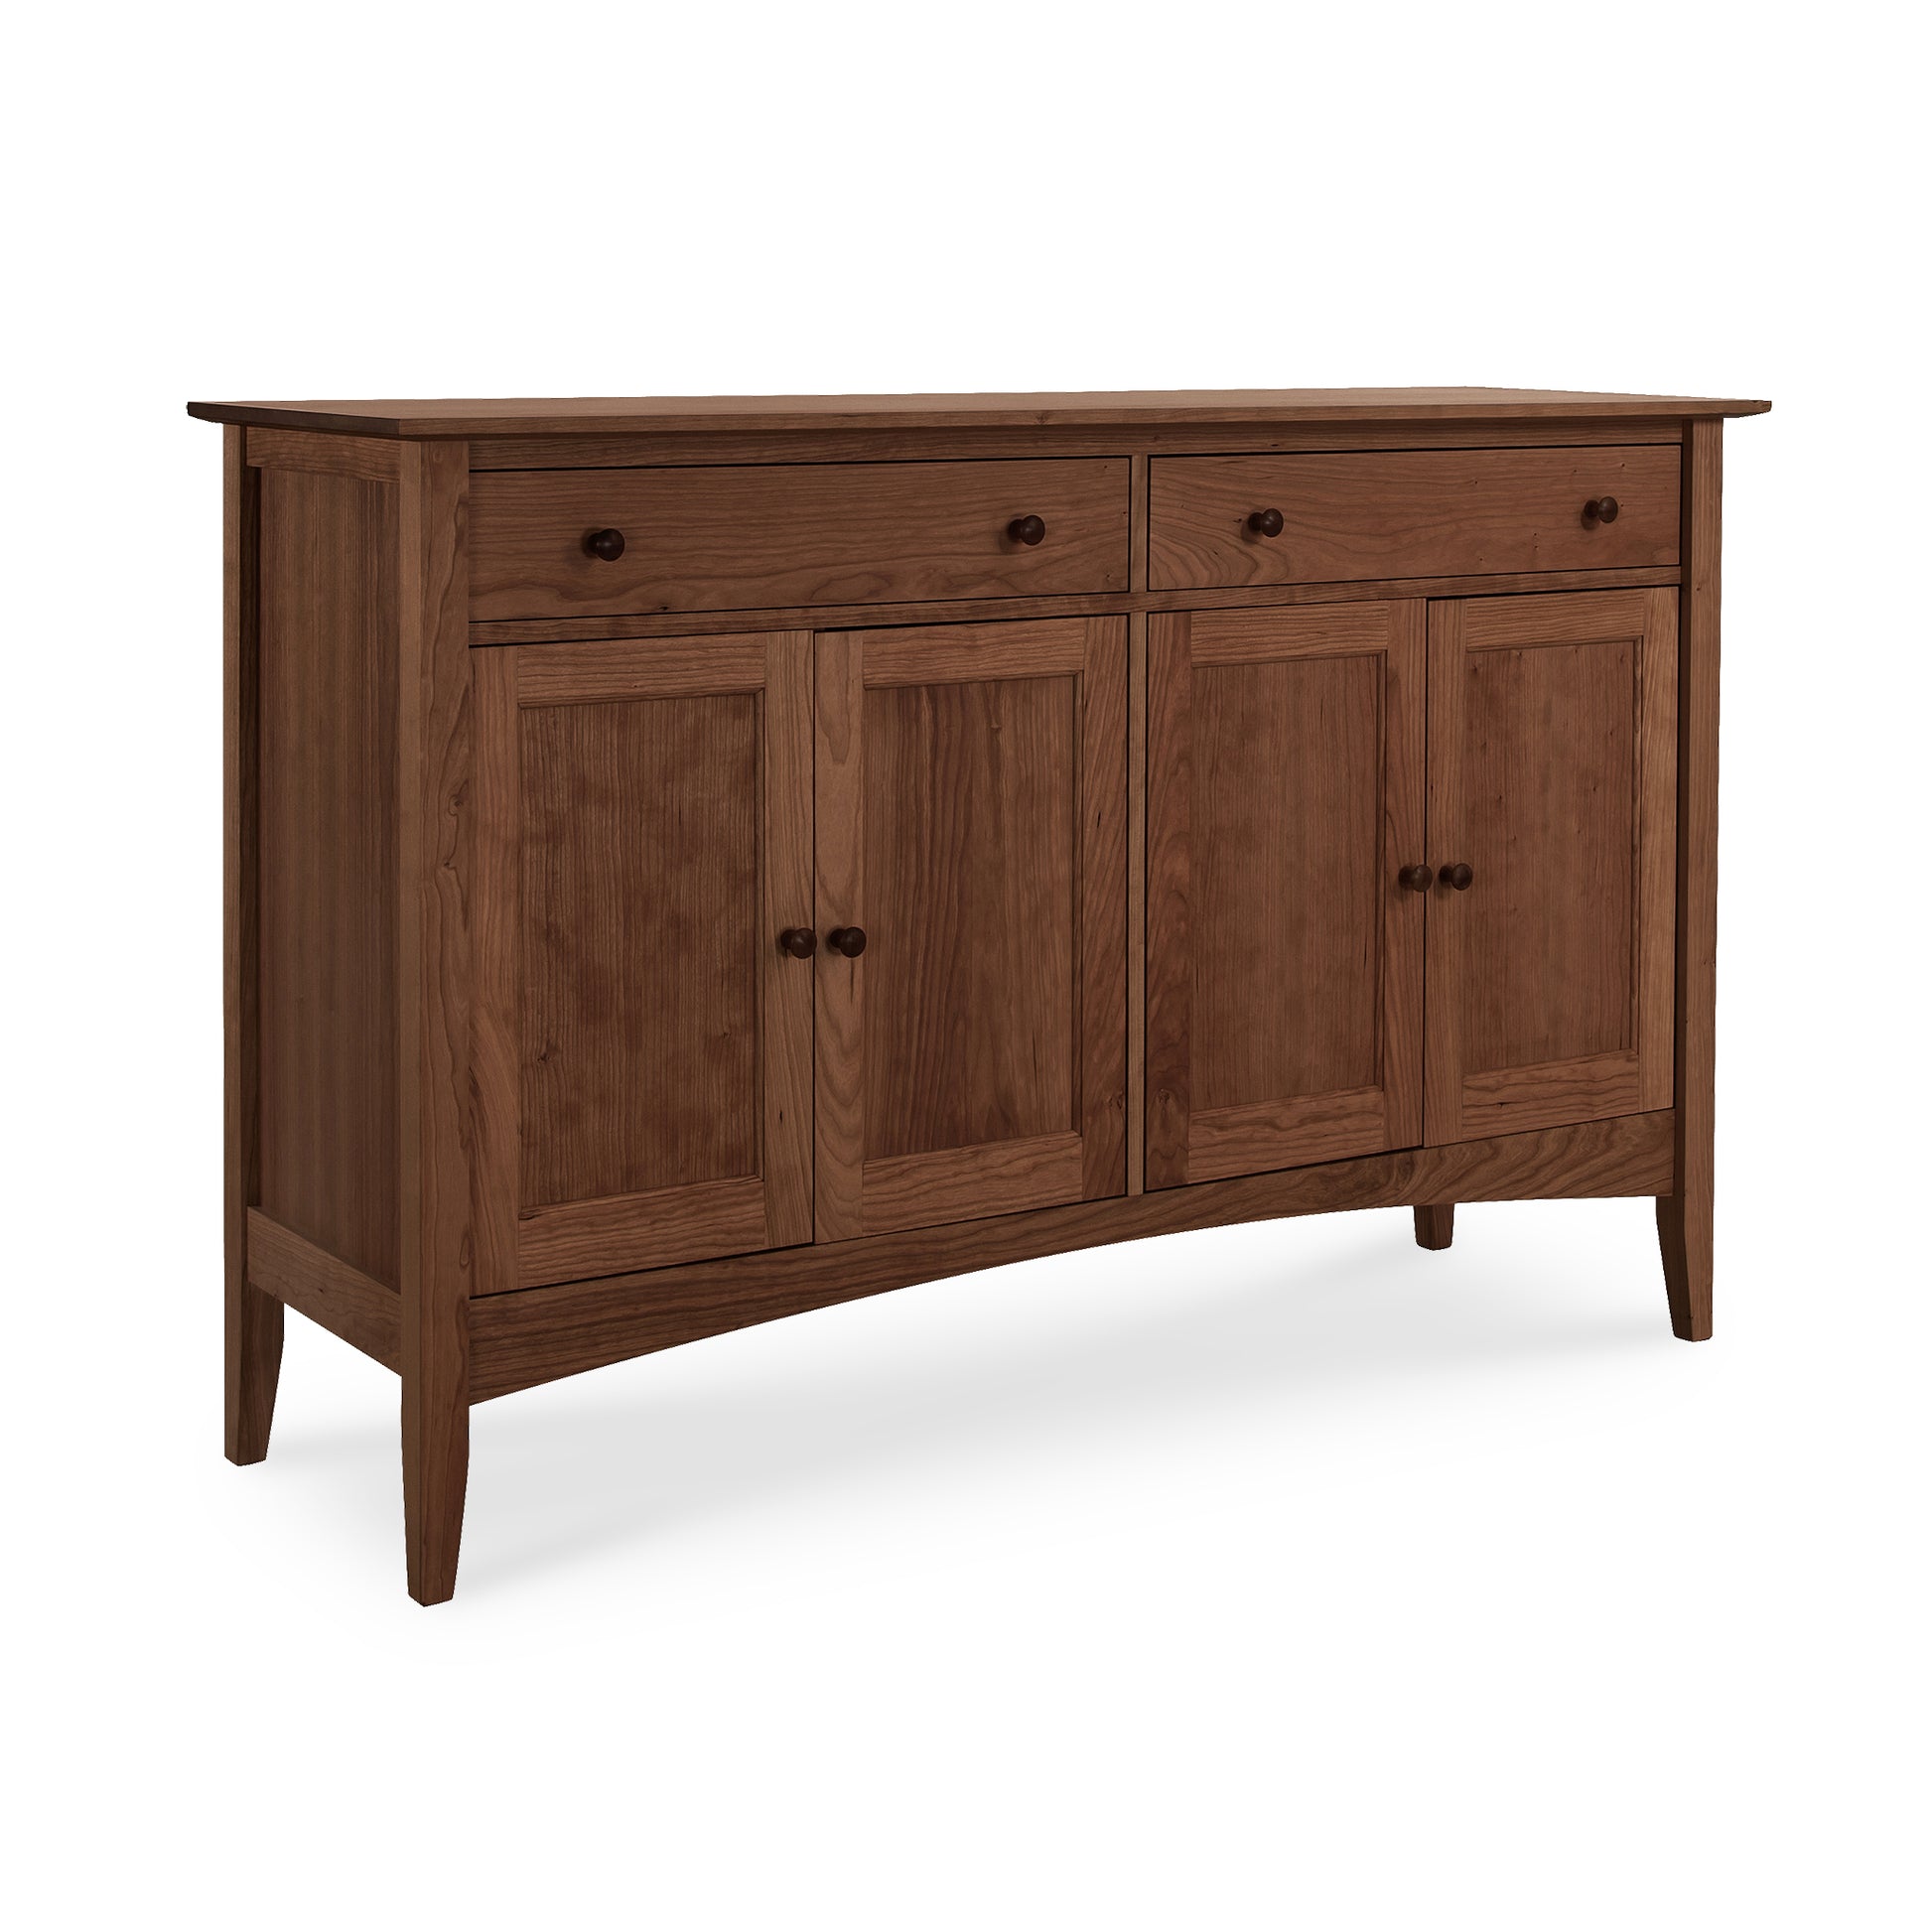 This Maple Corner Woodworks American Shaker Large Sideboard showcases Vermont craftsmanship with its solid hardwood construction and features two doors and two drawers.